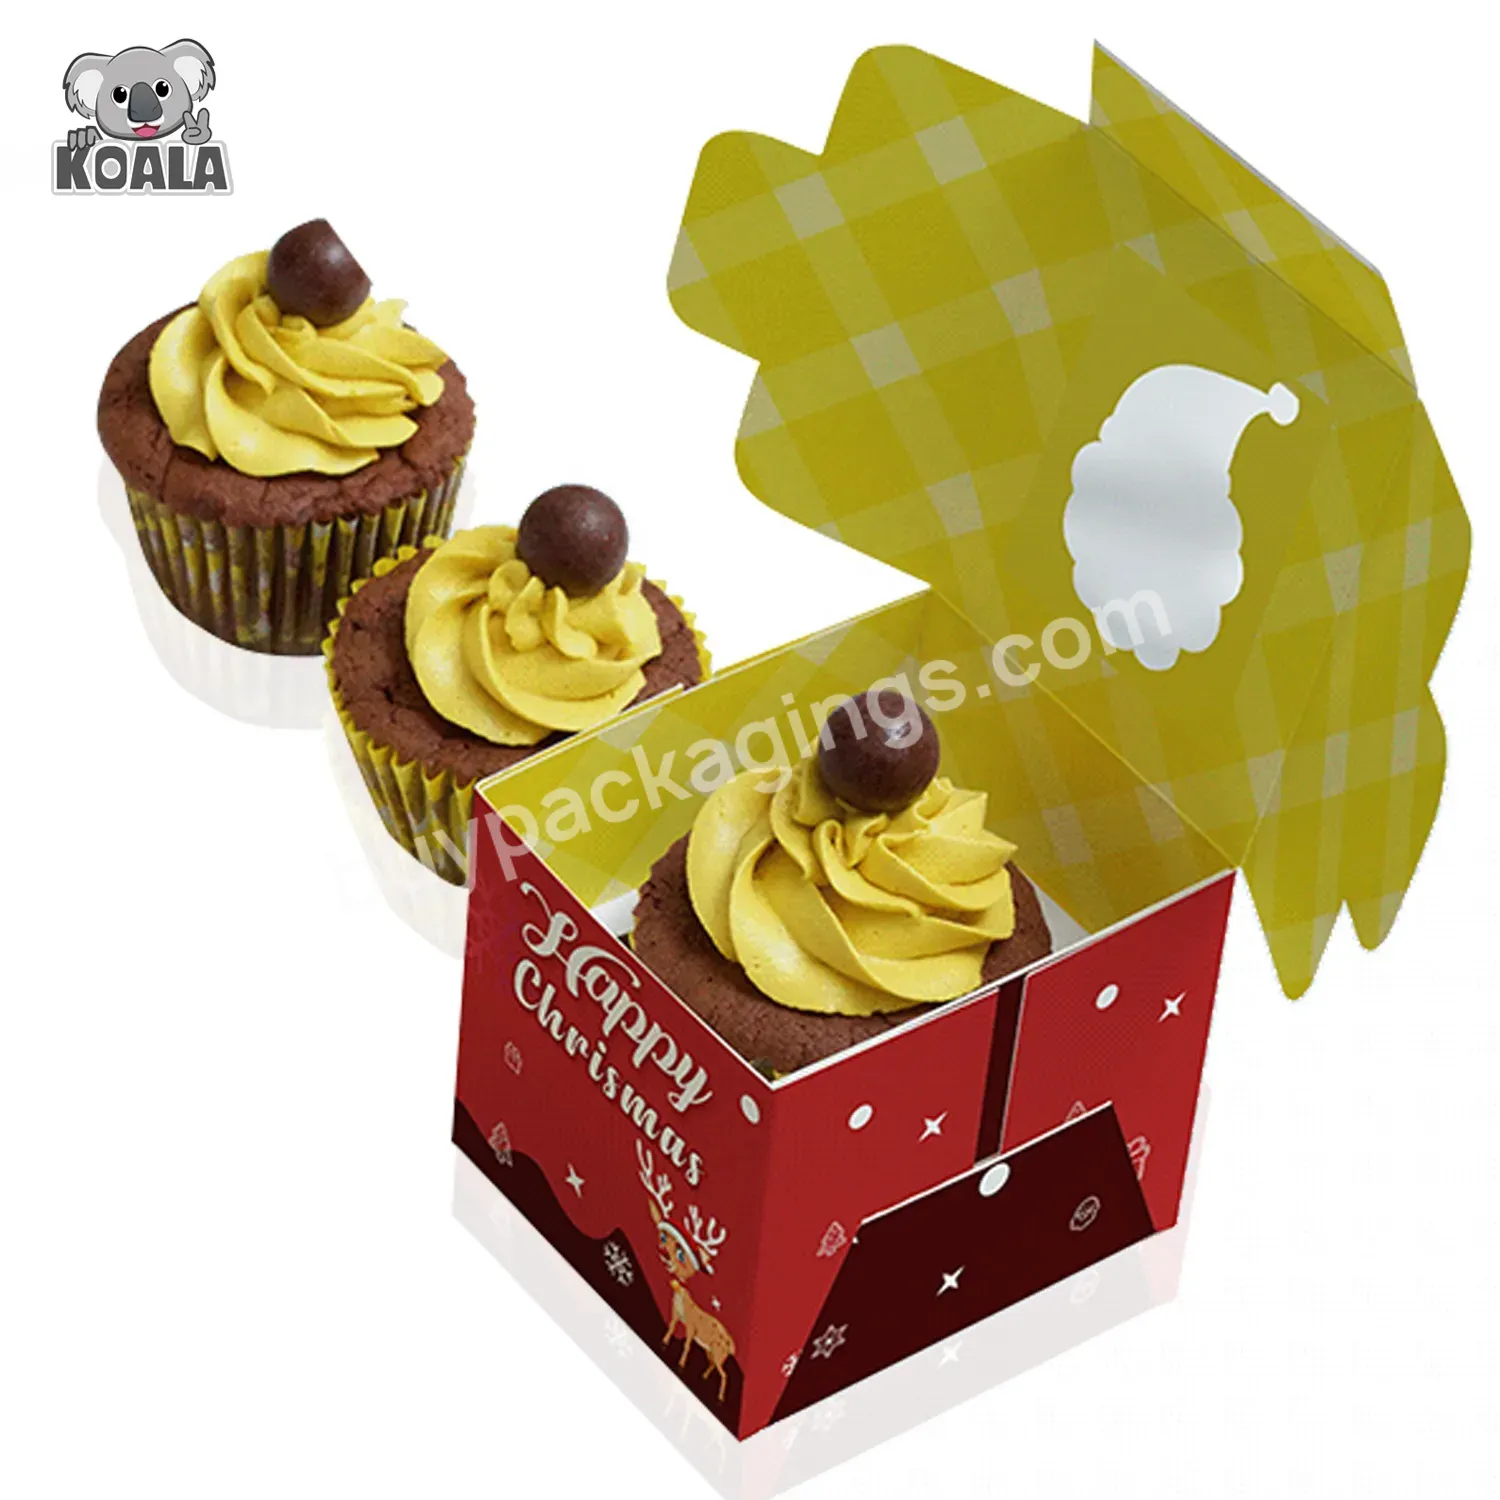 Oem Environmental Certified 100% Recyclable Oem Paper Cupcakes Pastry Paper Packaging Box With Clear Lid Windows